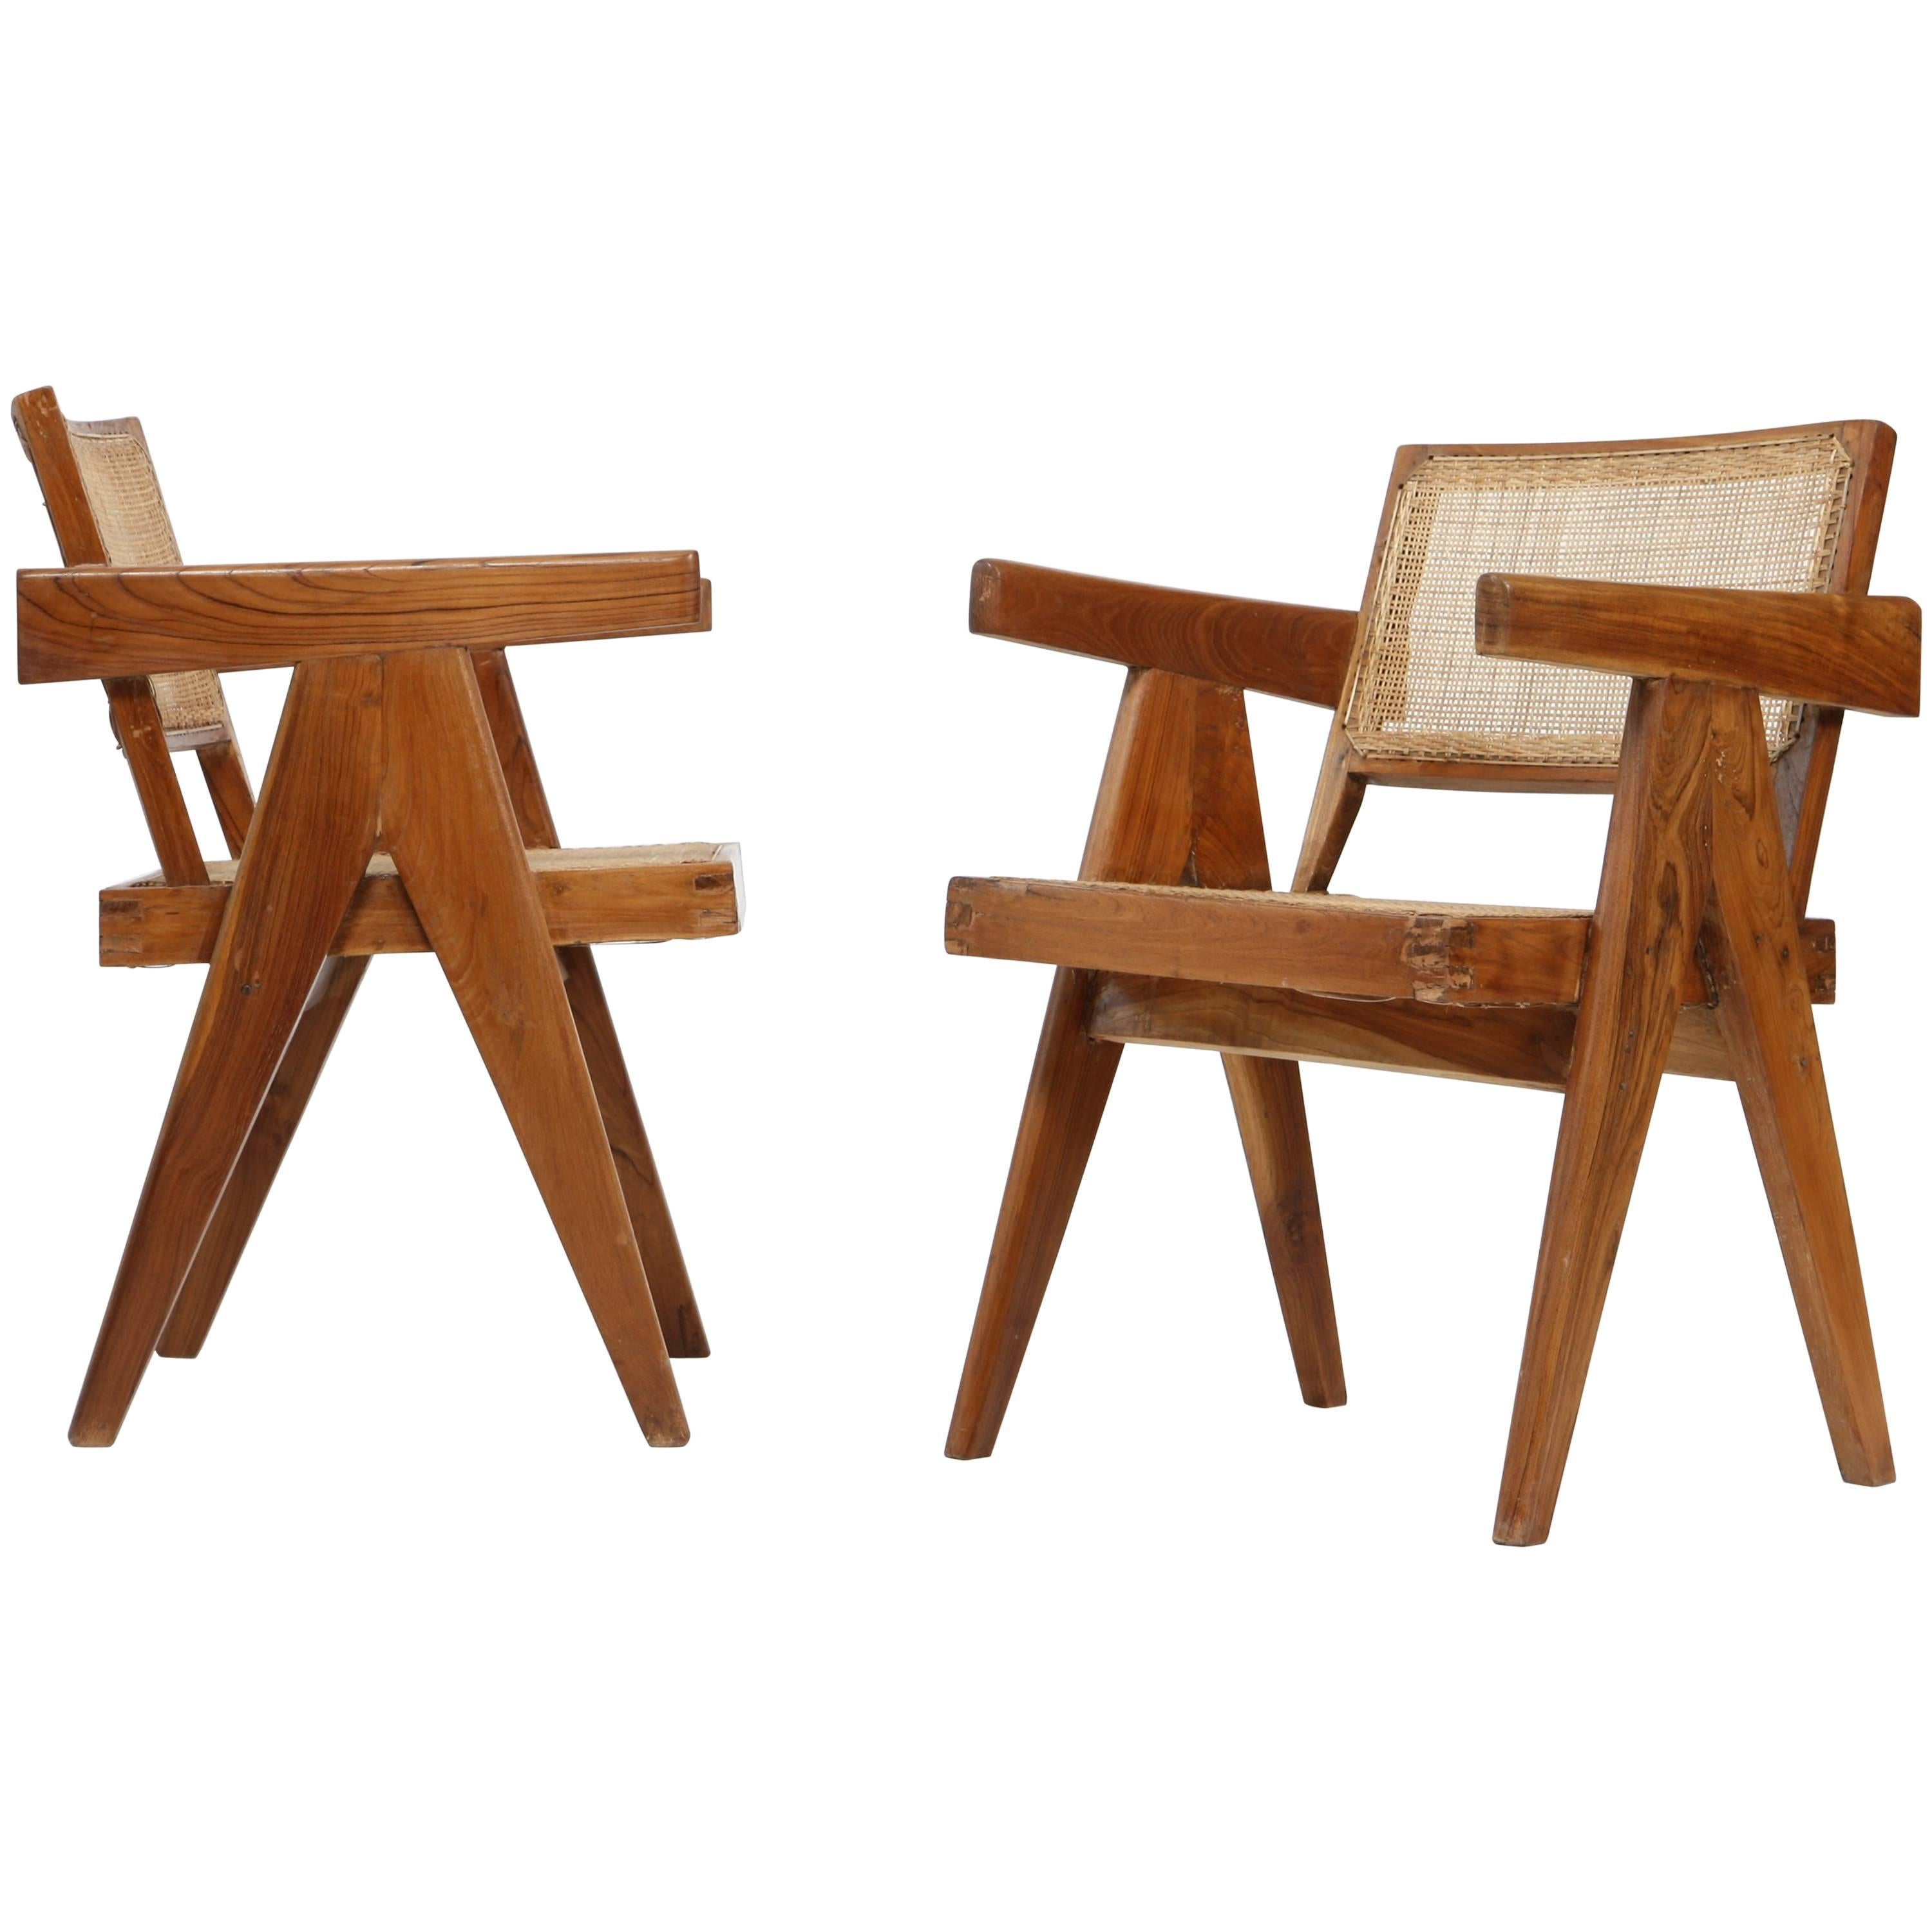 Set of Two Armchairs called "Office Cane Chairs" of Pierre Jeanneret